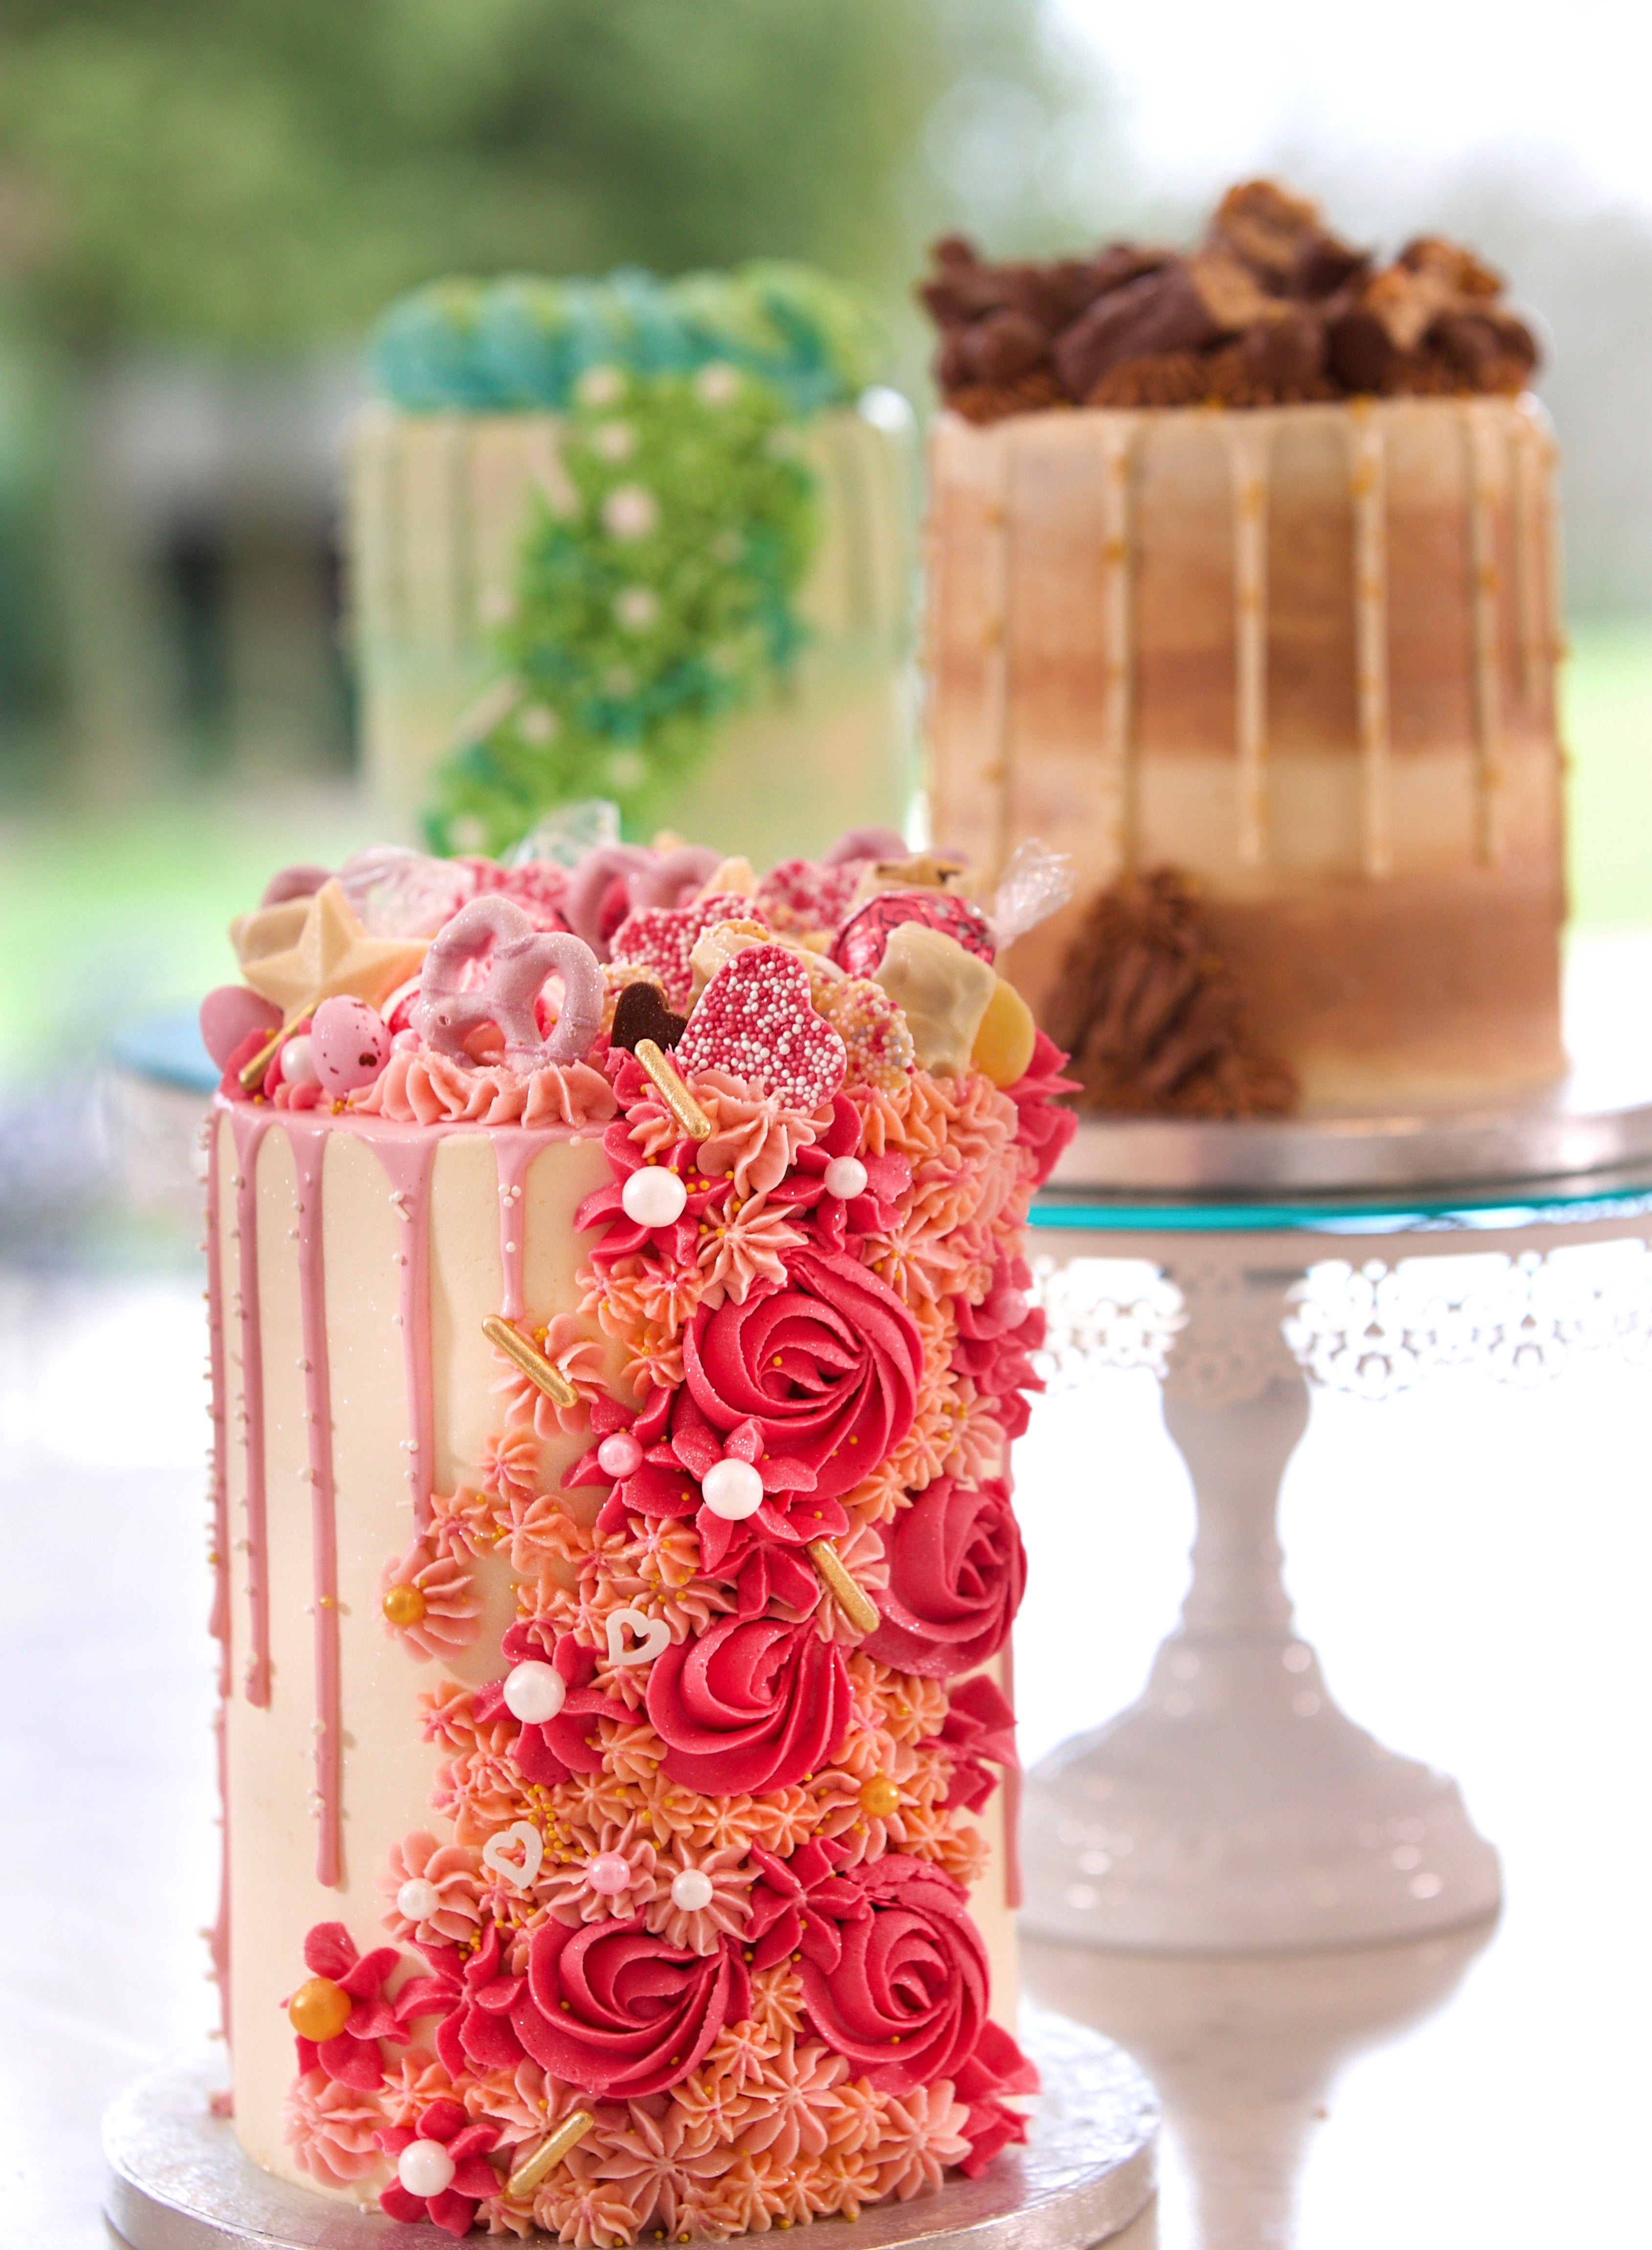 Build Your Own Cake, Large Tiered (serves 45-50) (+£115) / No / Chocolates – may contain nuts (+£5) – Amy’s Bakehouse